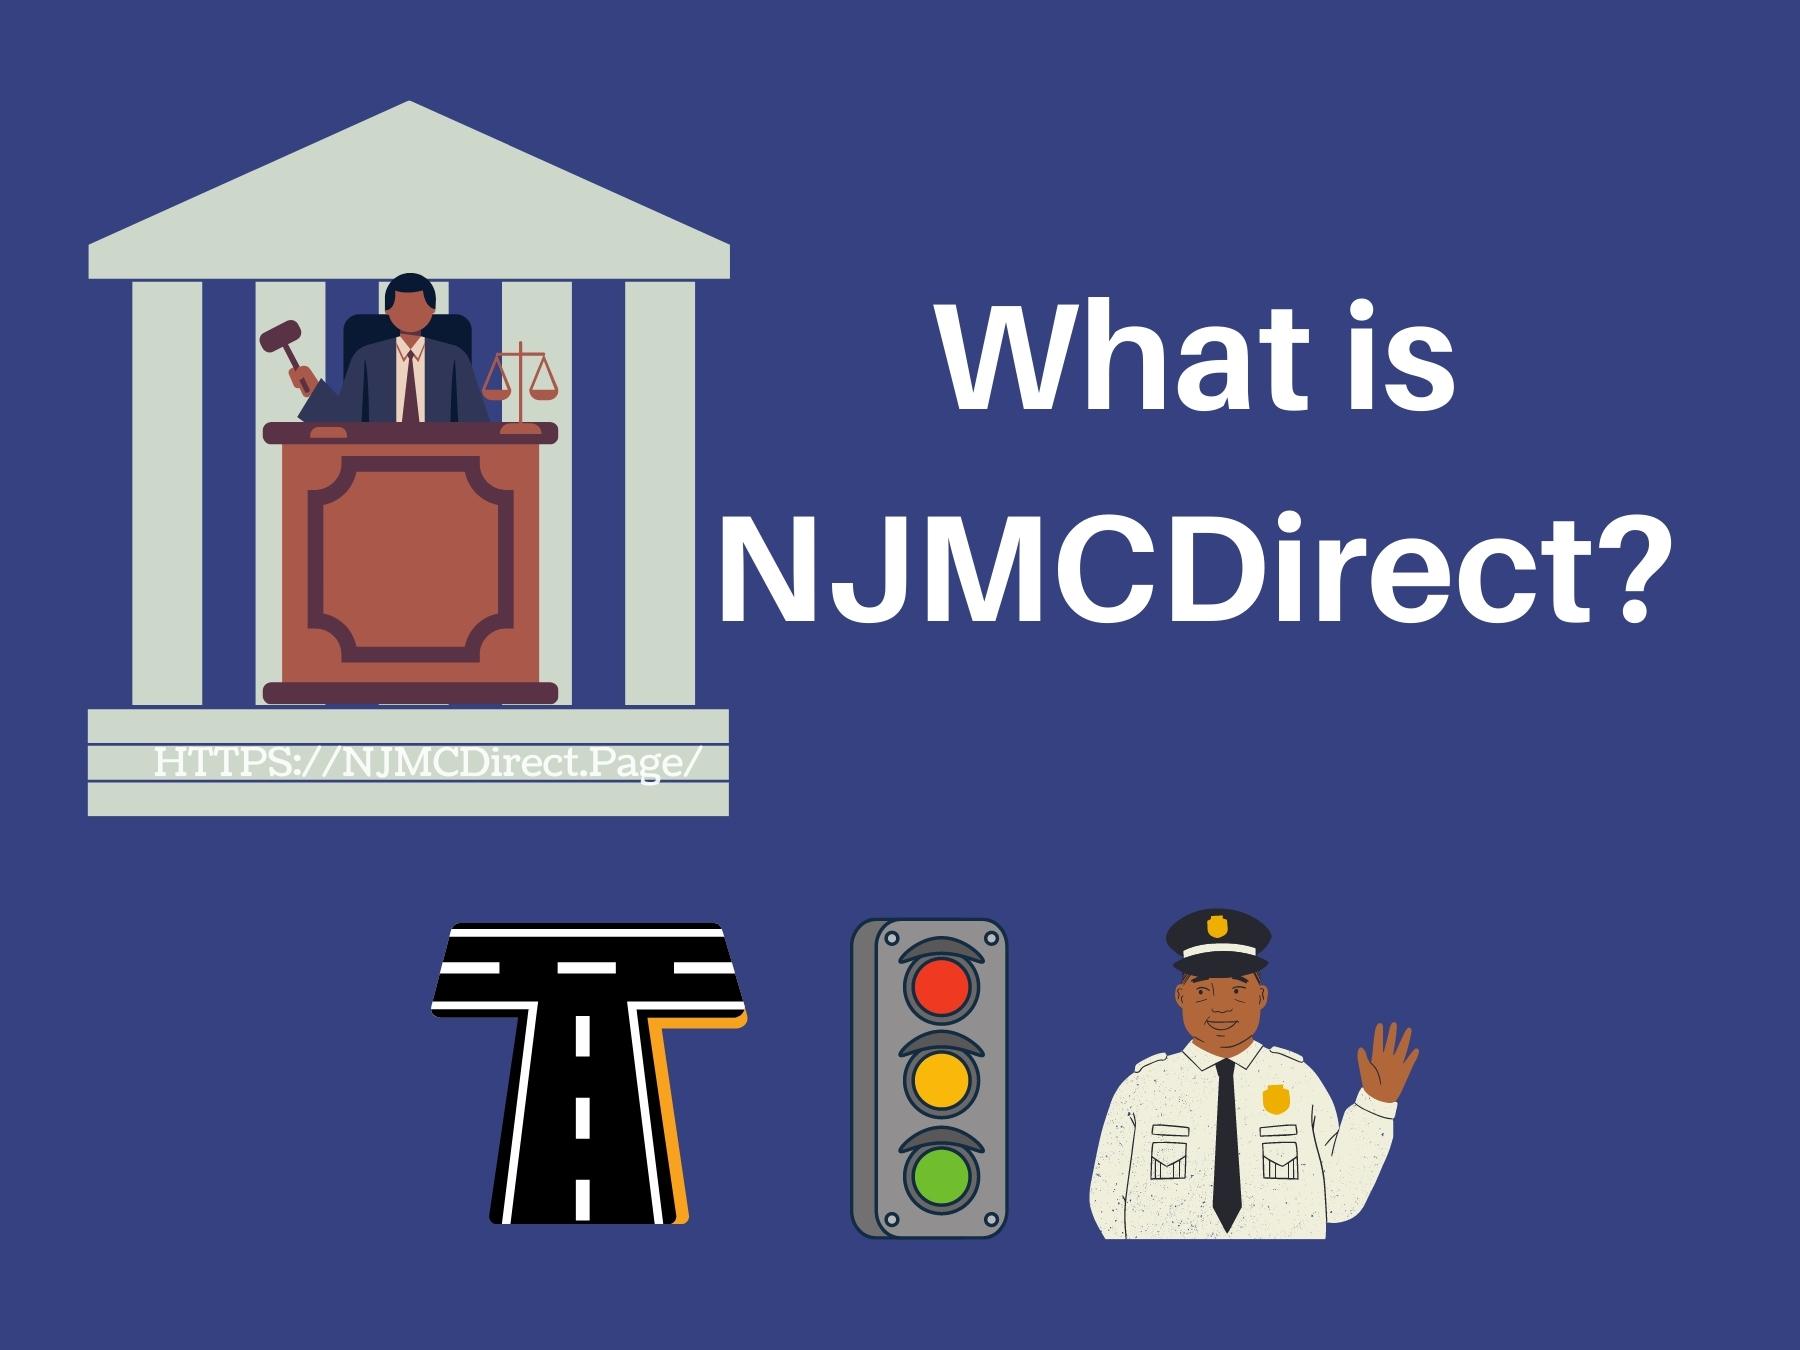 NJMCDIRECT - www.njmcdirect.com Ticket Payment Online